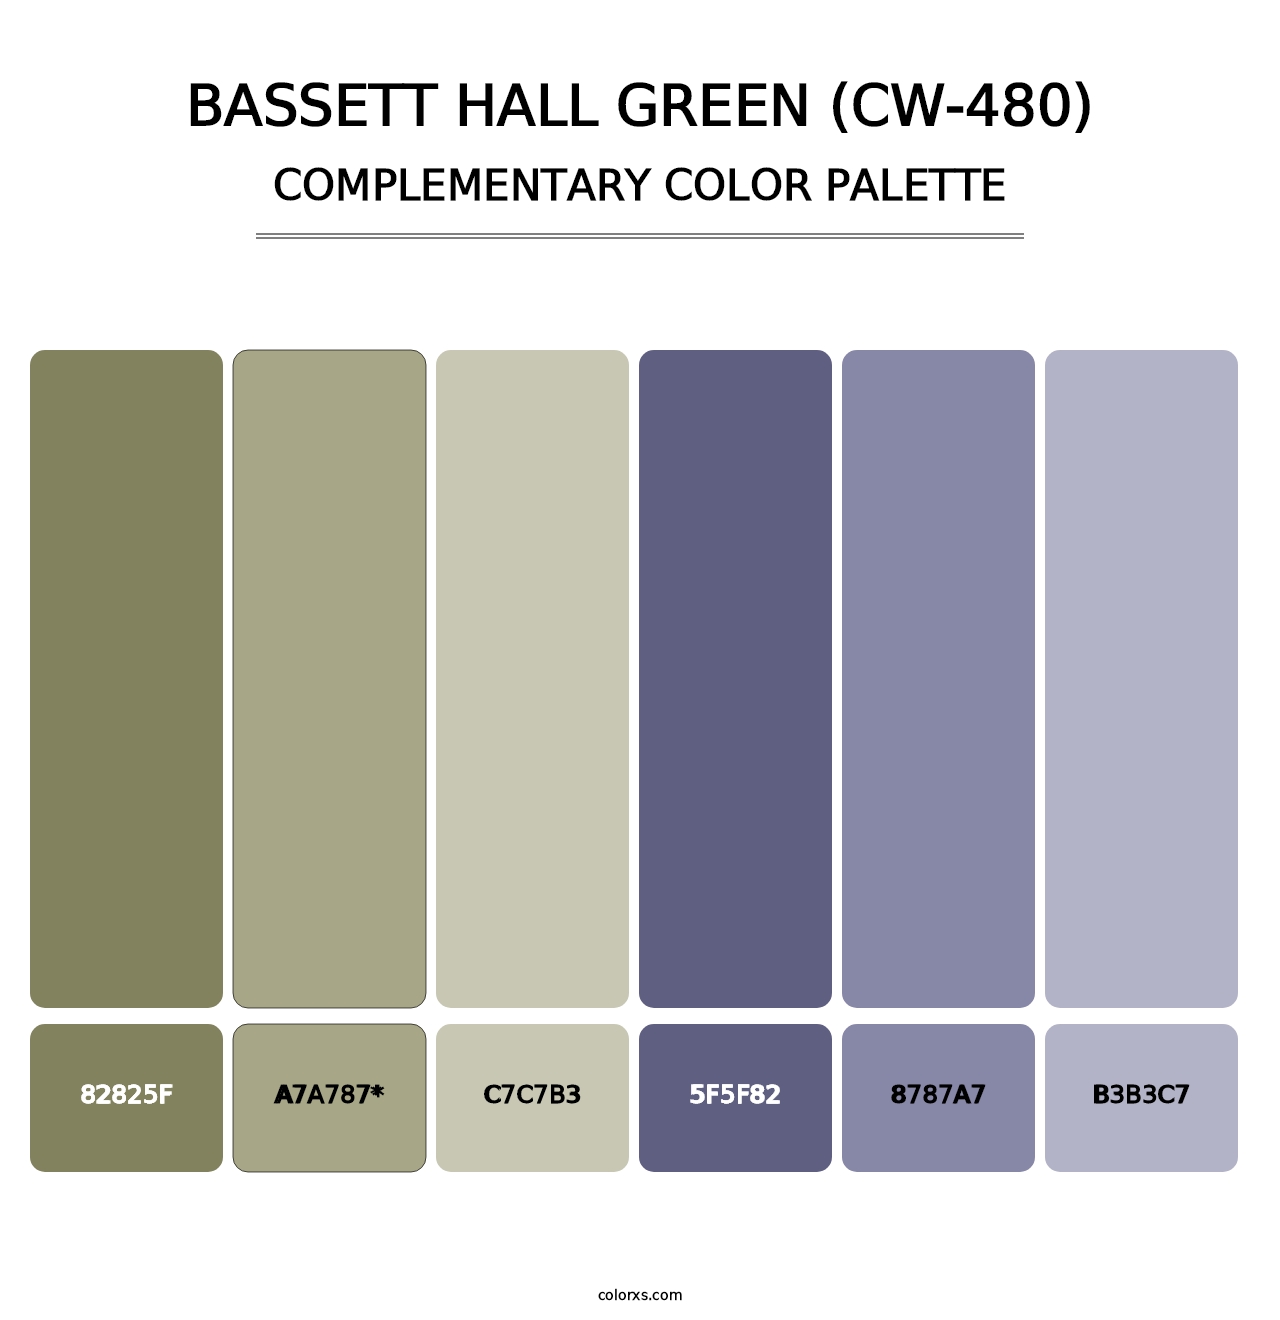 Bassett Hall Green (CW-480) - Complementary Color Palette